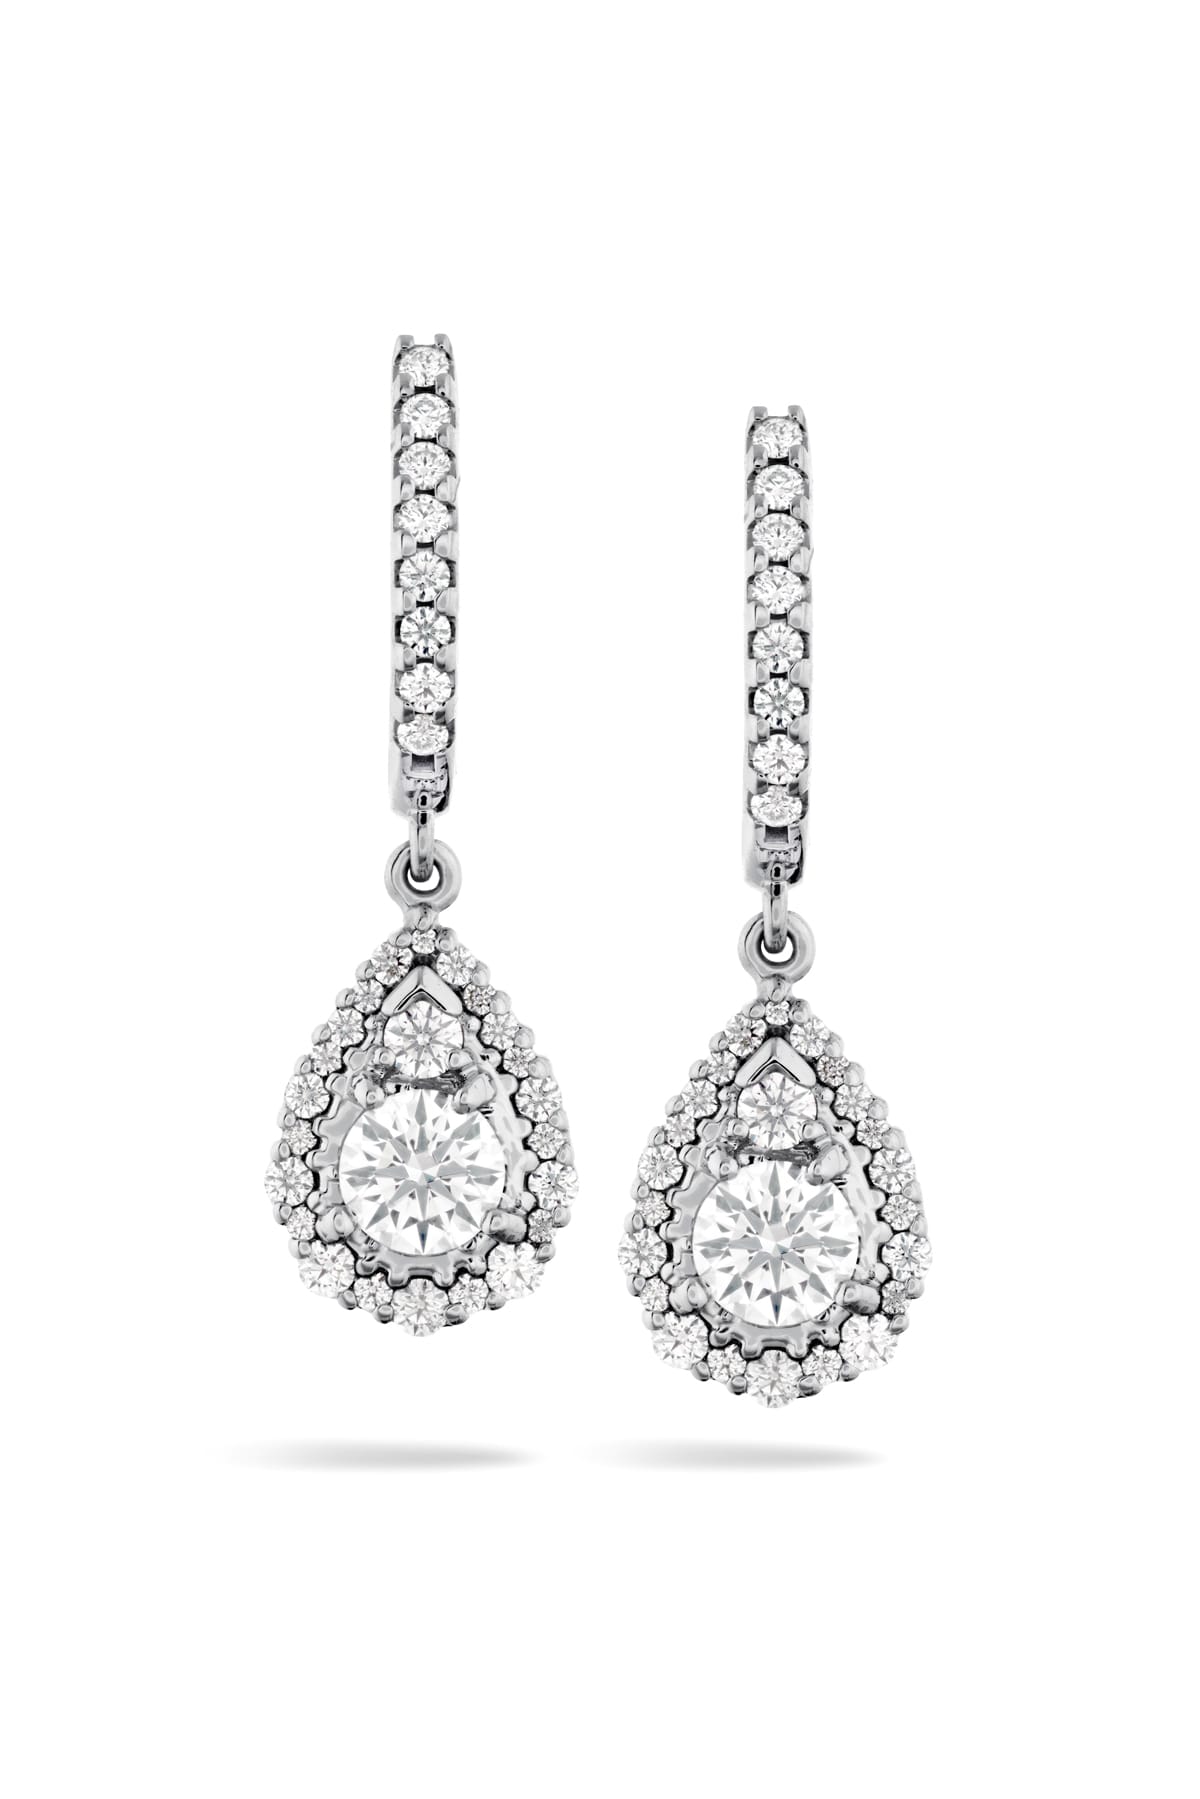 Teardrop Halo Drop Earrings From Hearts On Fire available at LeGassick Diamonds and Jewellery Gold Coast, Australia.